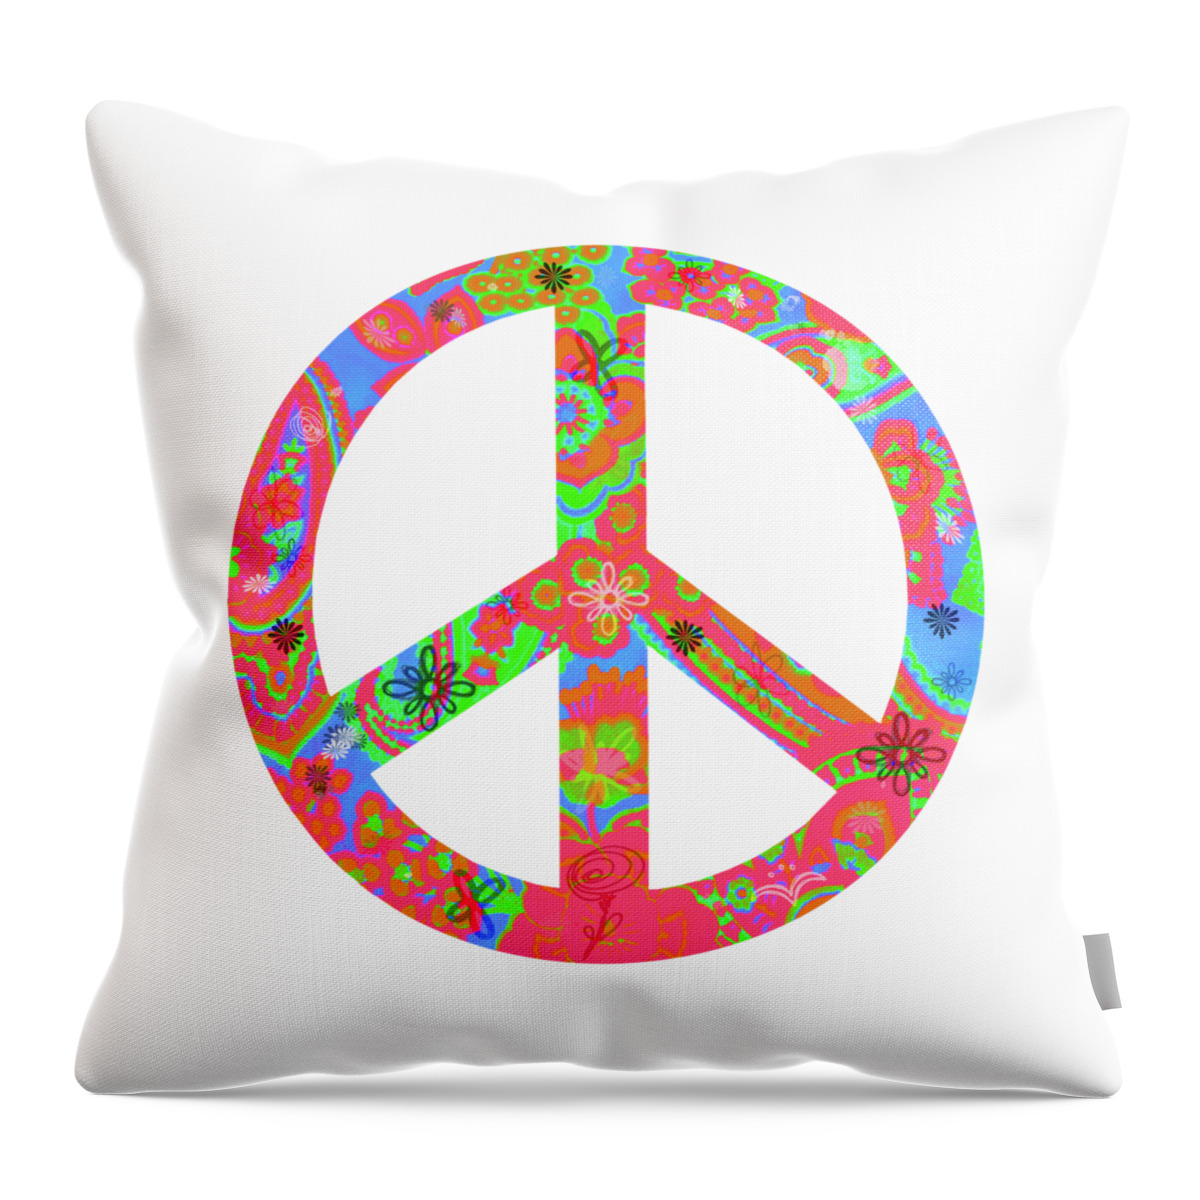 Flower Throw Pillow featuring the digital art Peace by Linda Lees